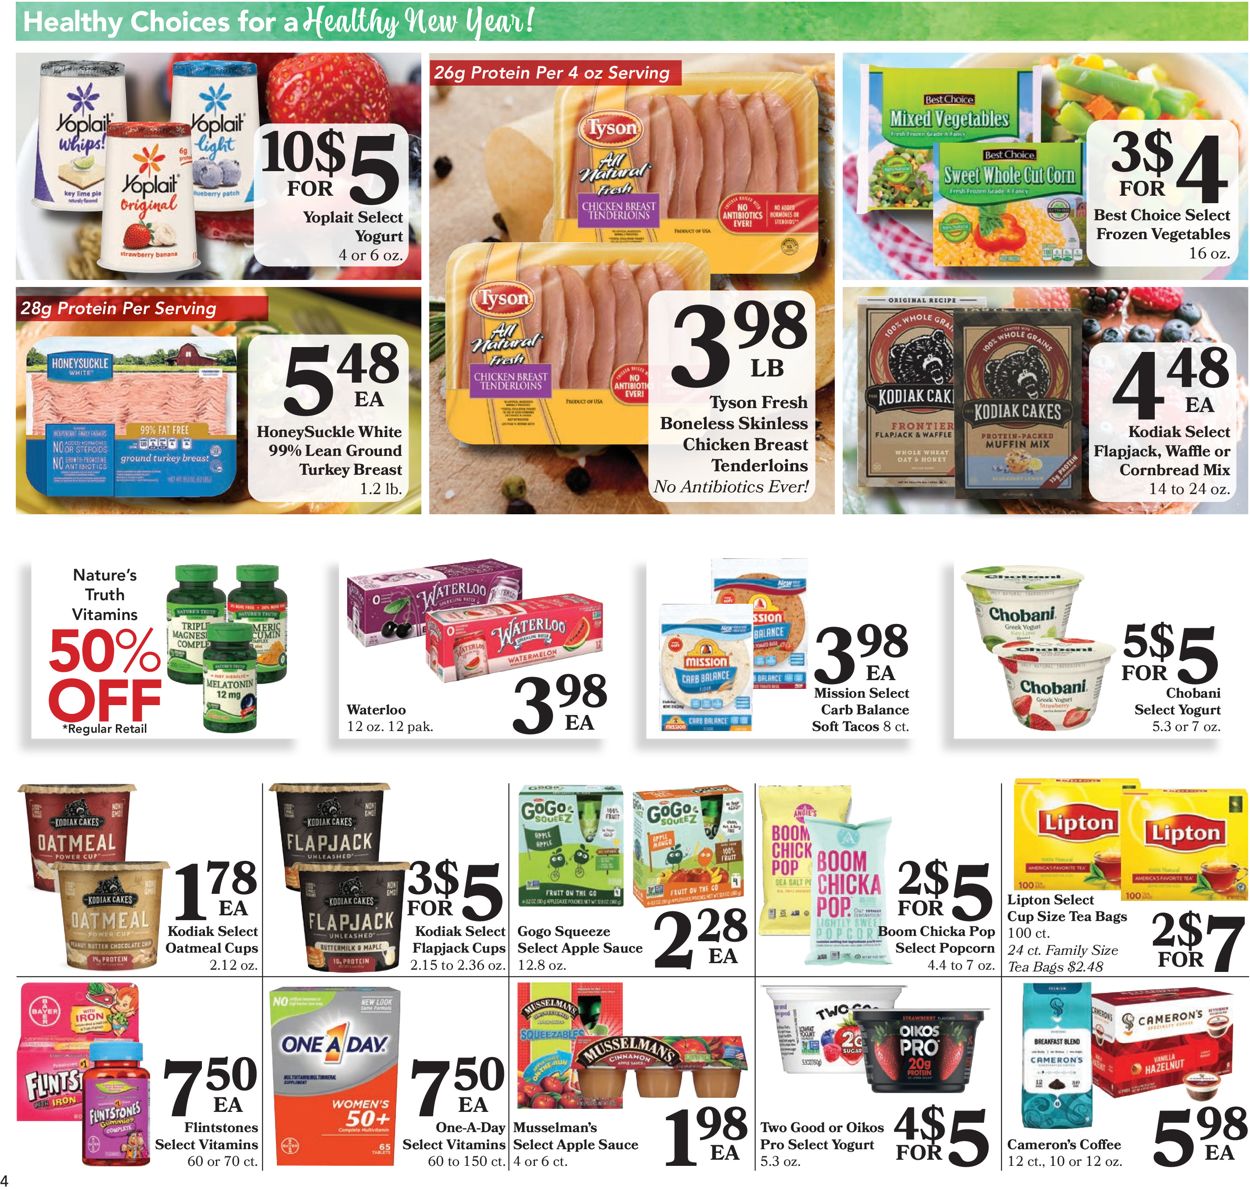 Catalogue Harps Foods from 12/29/2021